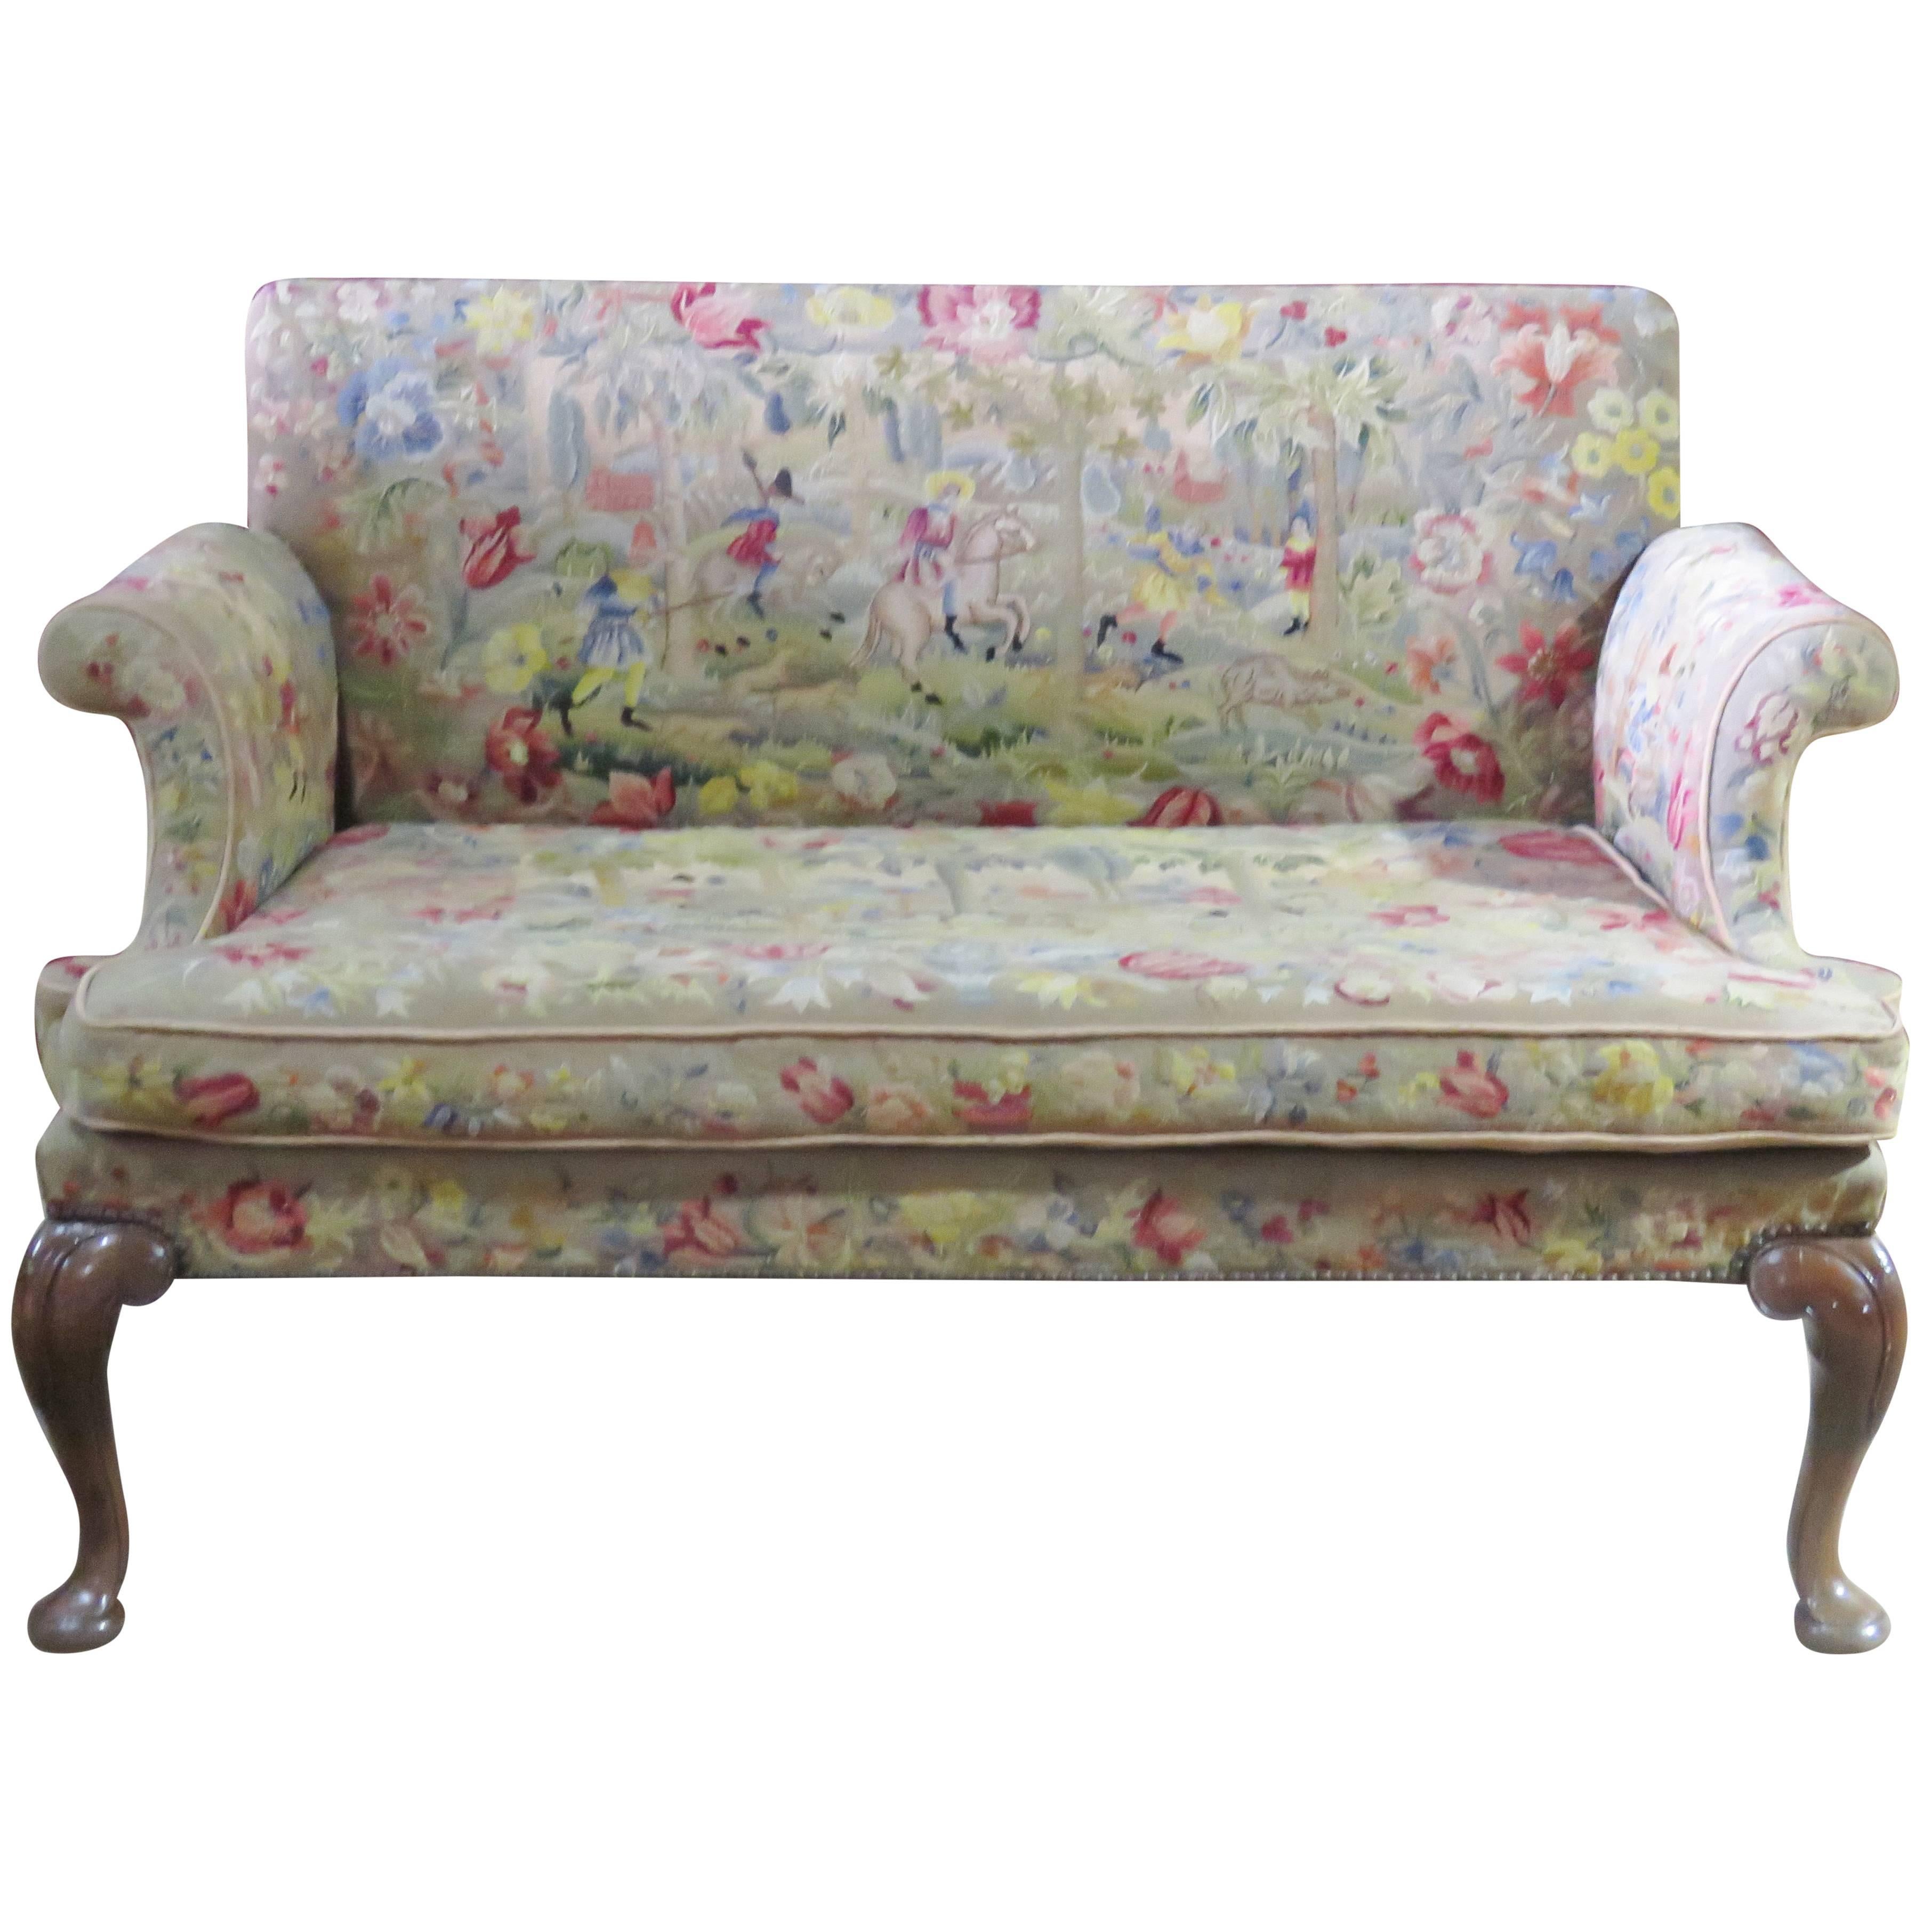 Queen Anne Style Needlepoint Settee